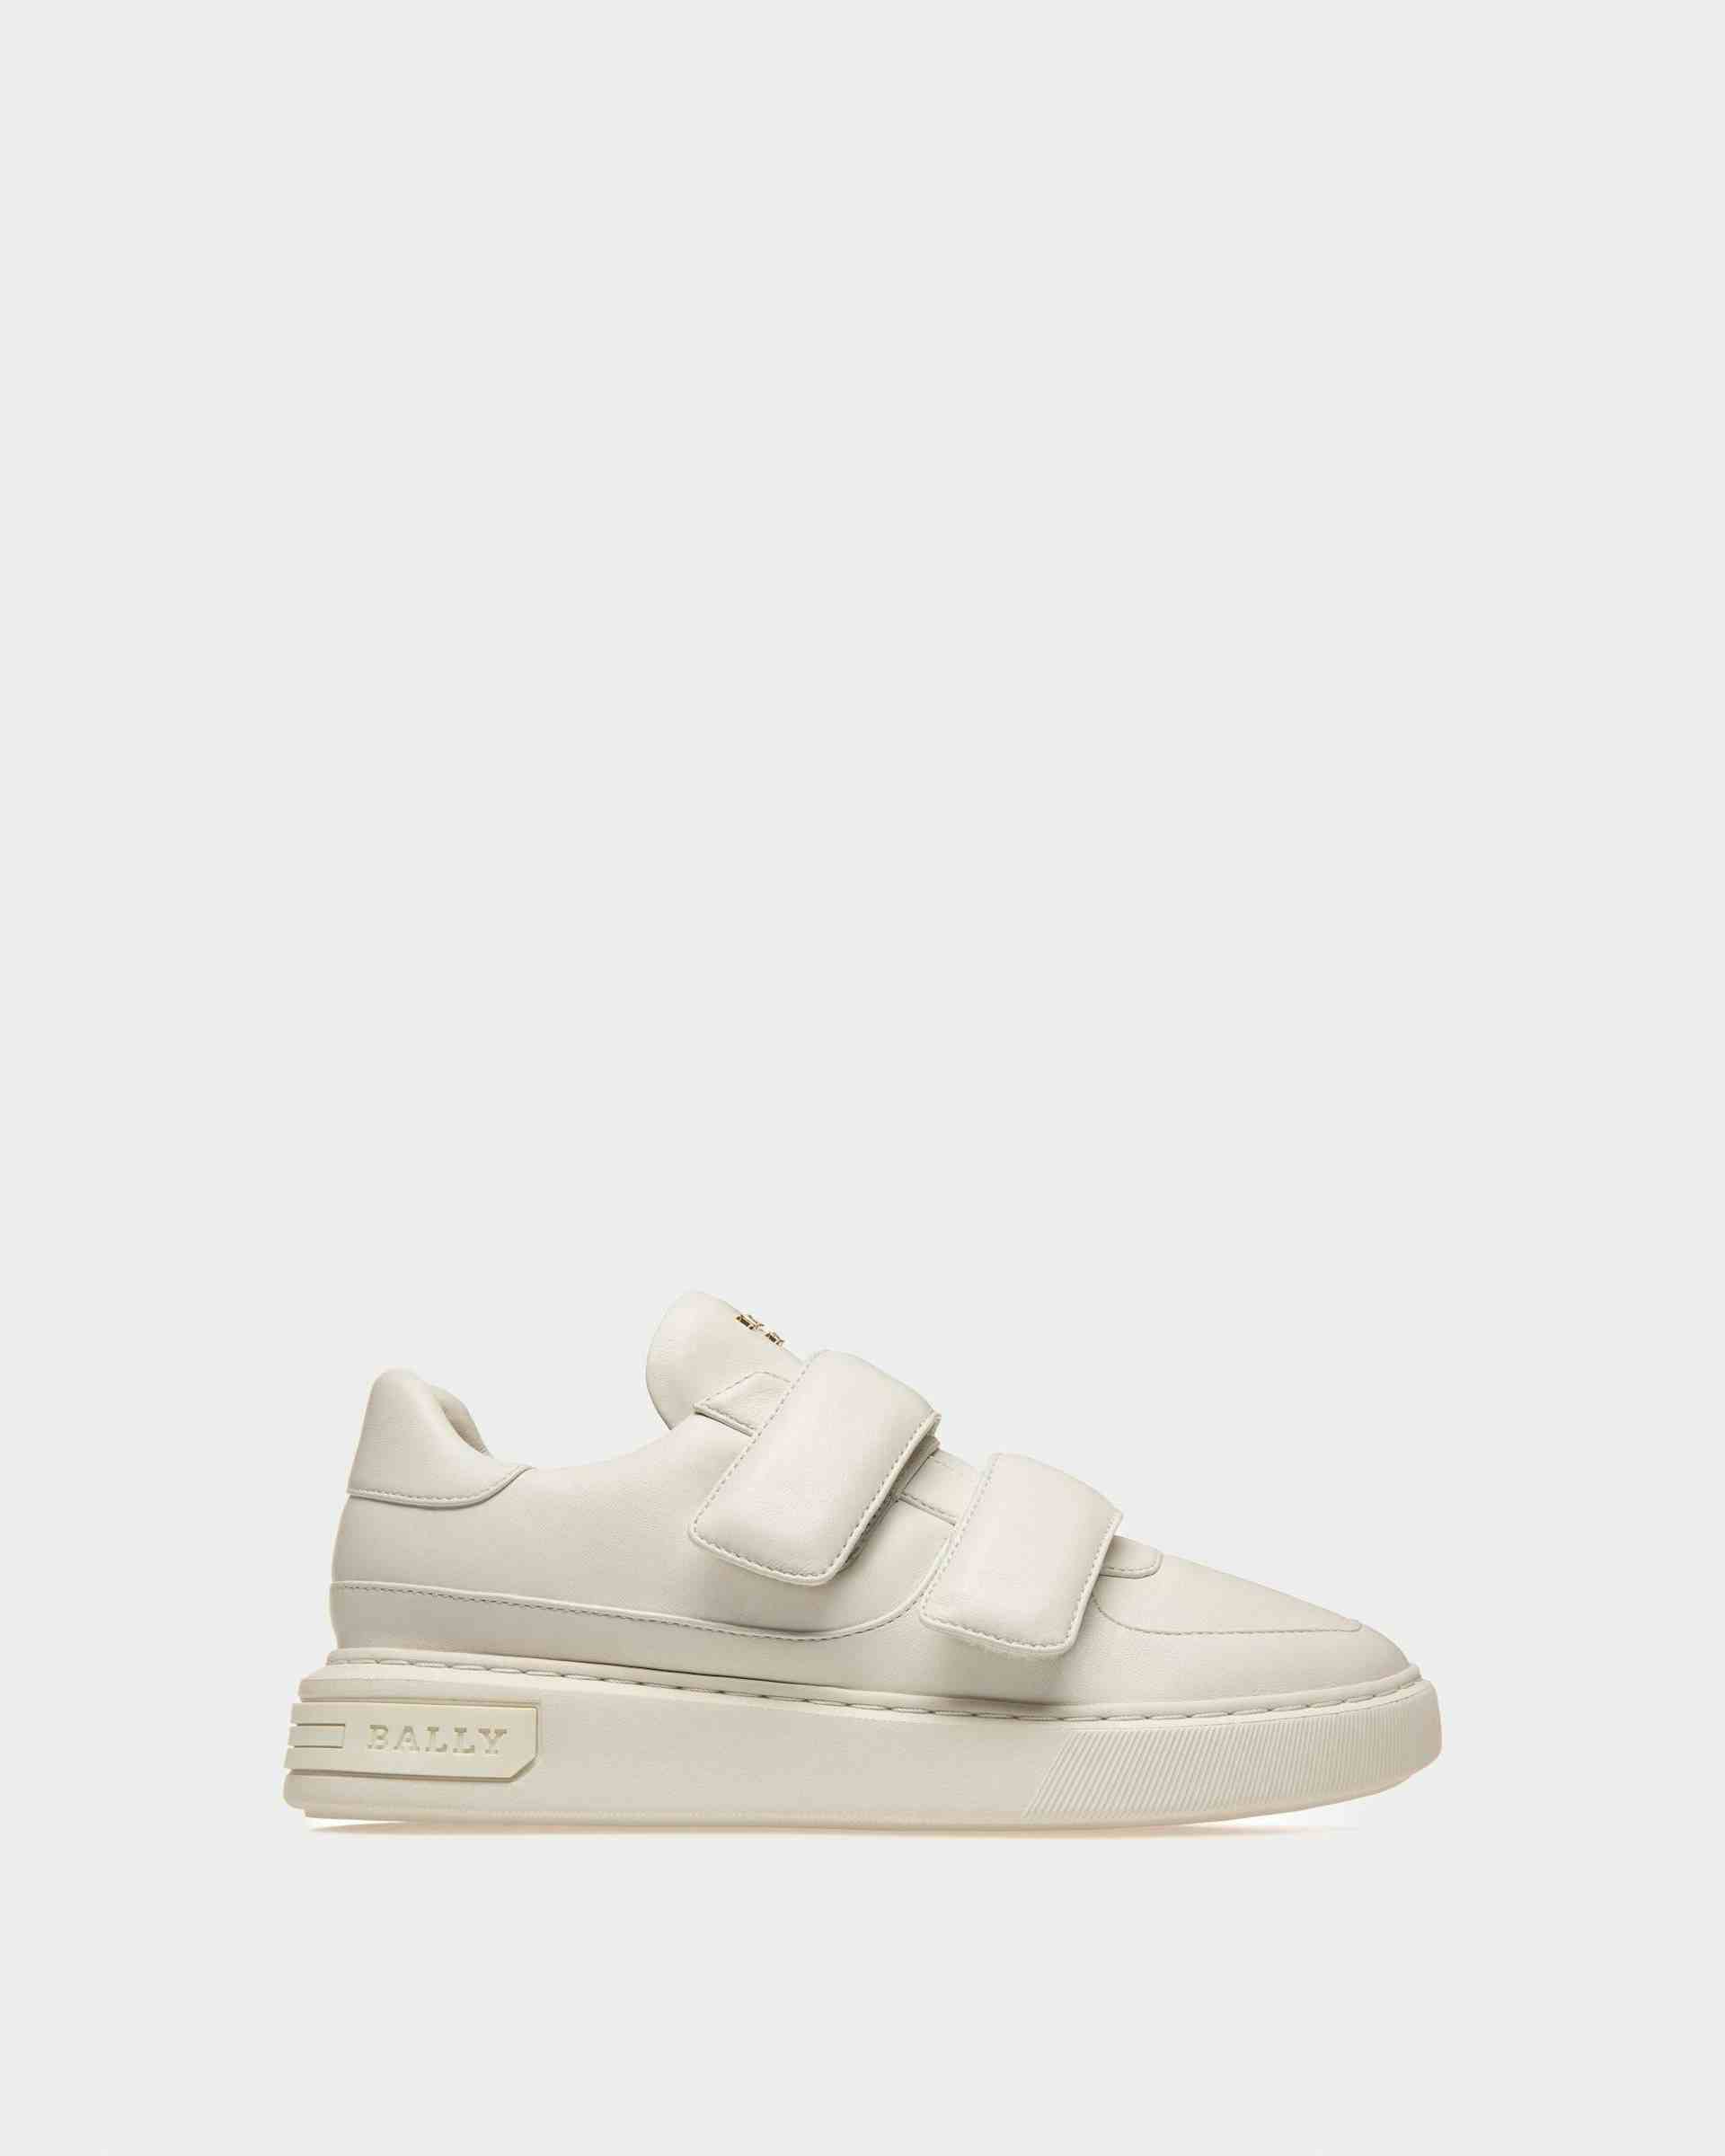 Maylor Leather Sneakers In White - Women's - Bally